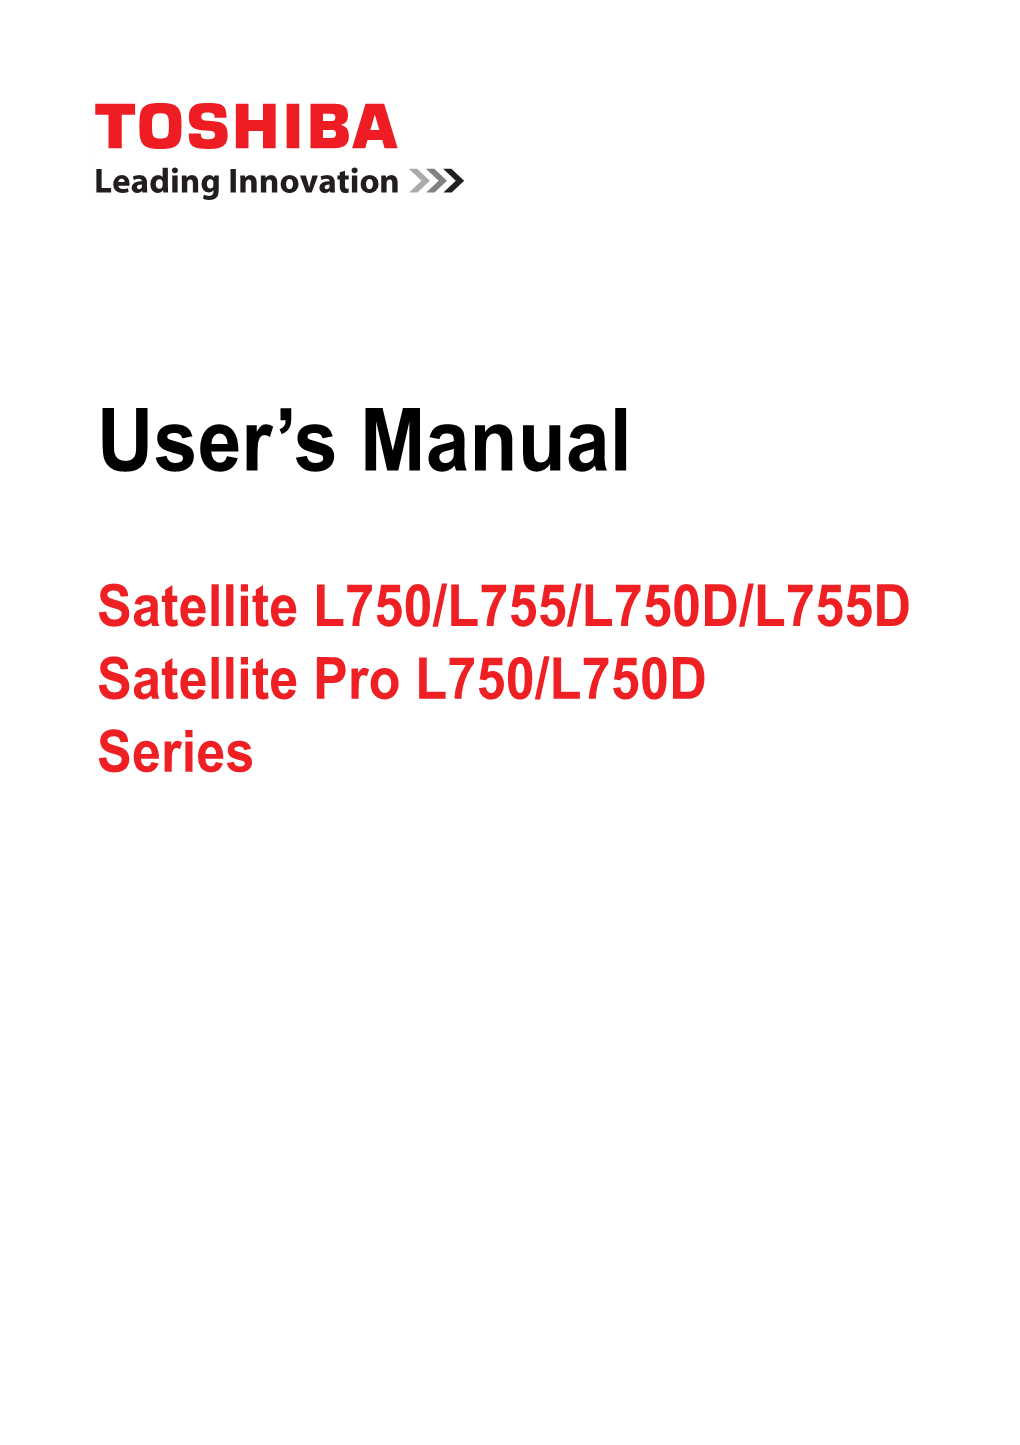 User's Manual (This Manual) * You May Not Have All the Softwares Listed Above Depending on the Model You Purchased